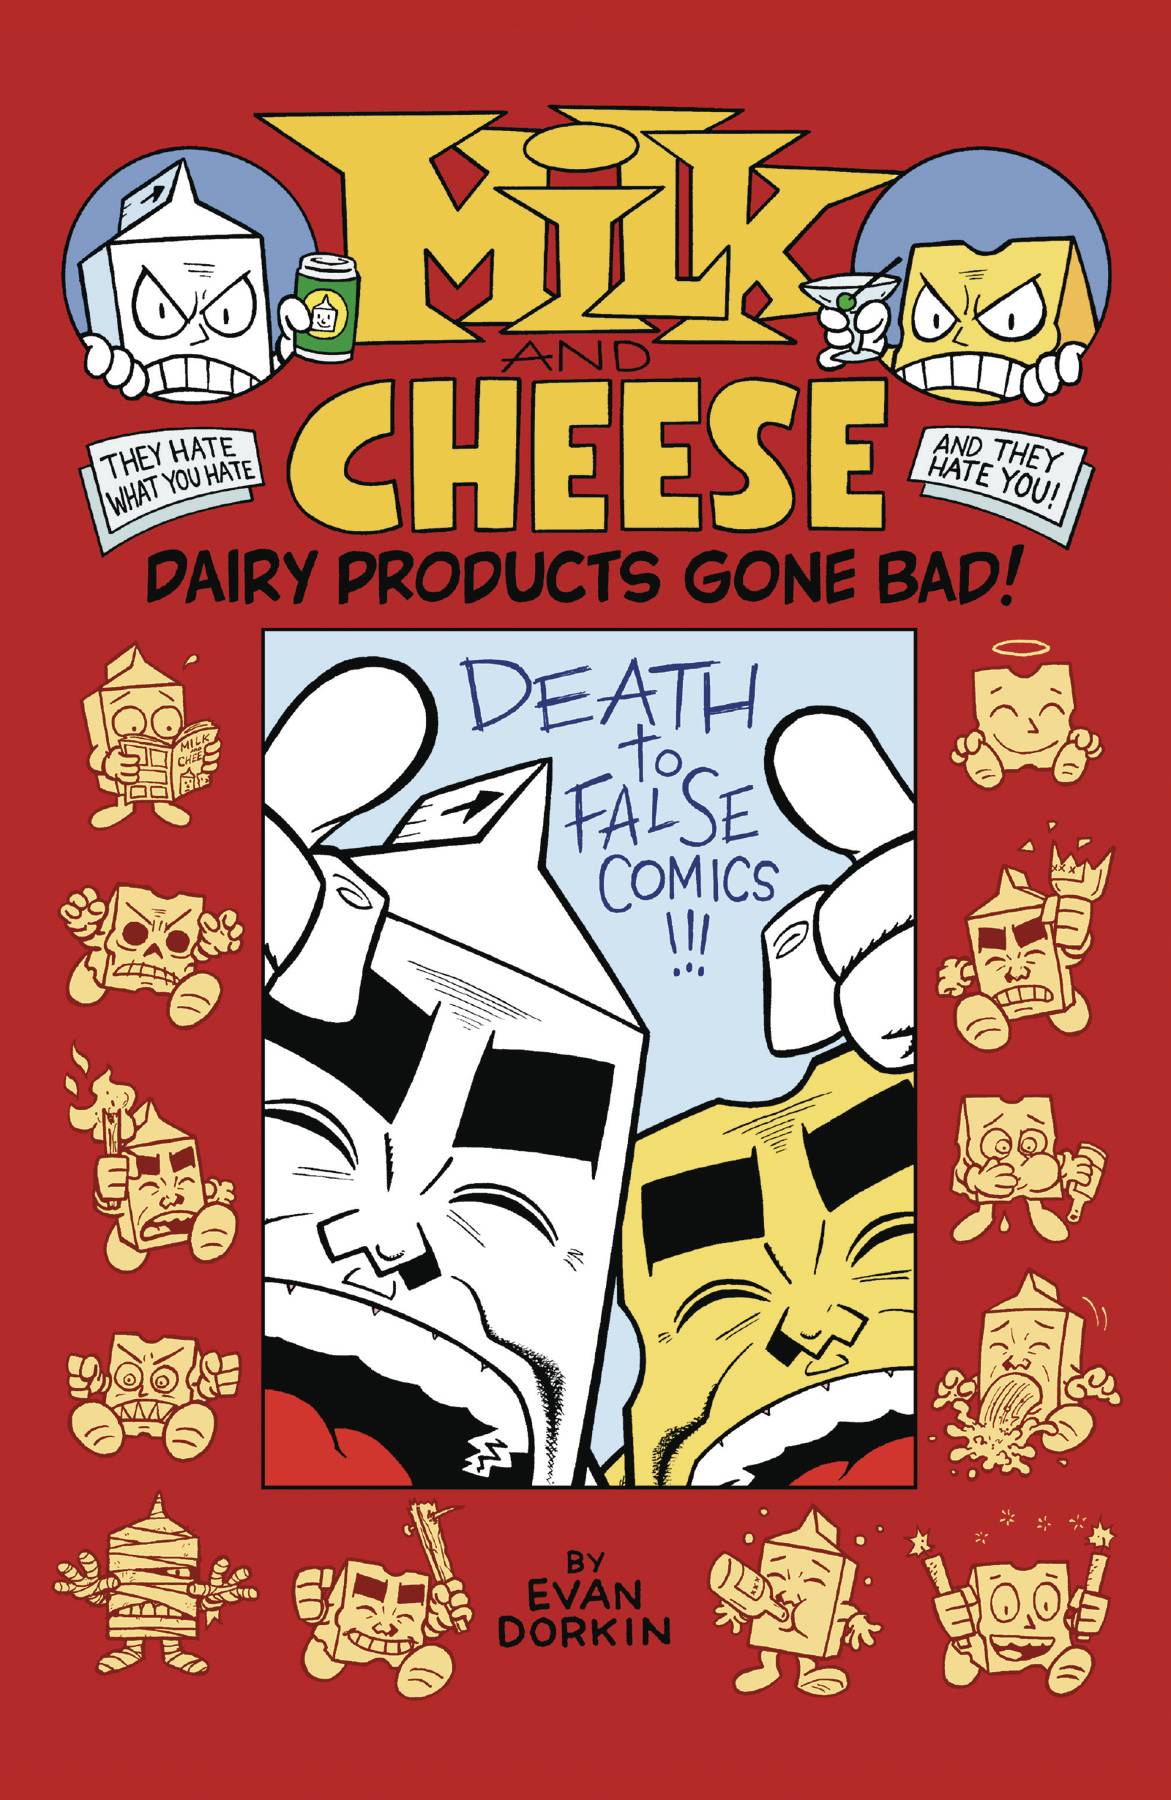 Milk & Cheese Dairy Products Gone Bad Graphic Novel